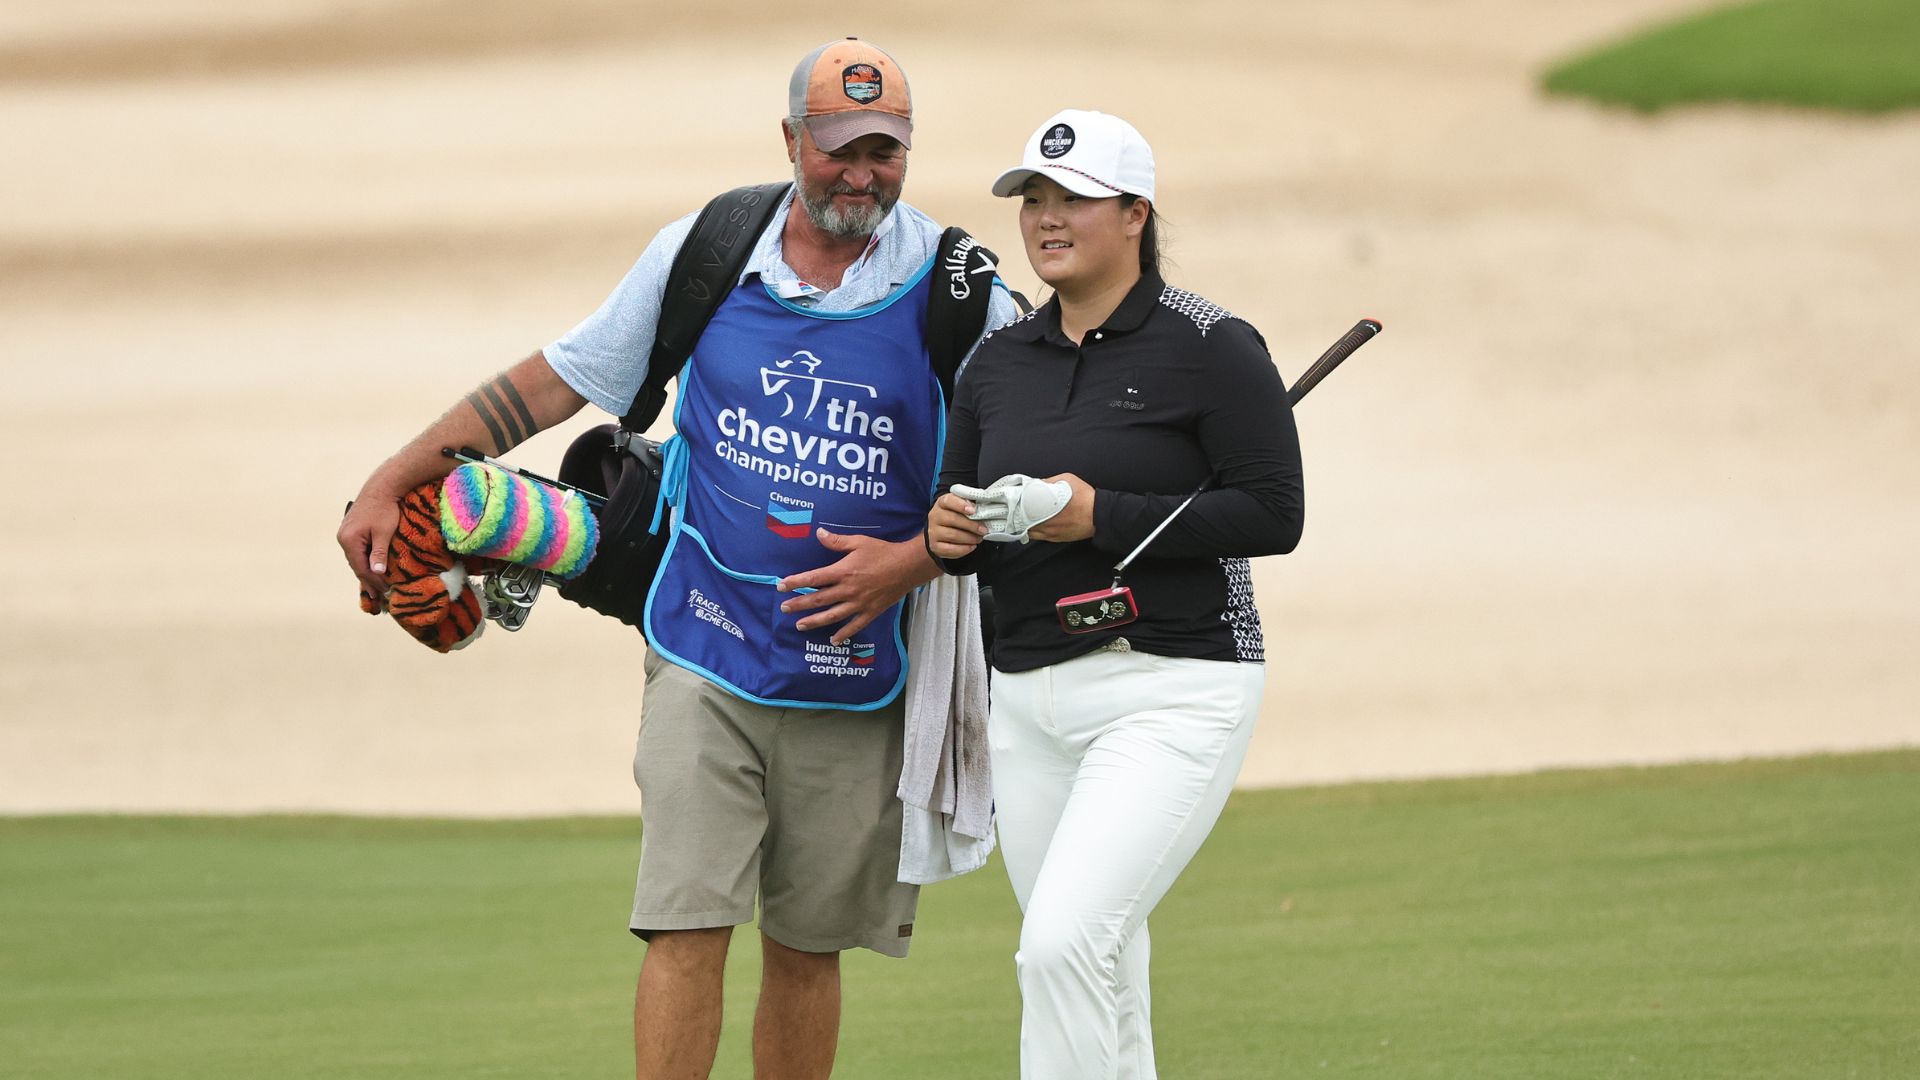 With ‘low’ confidence, Angel Yin opens 2023 Chevron Championship with 69 after another year of struggles